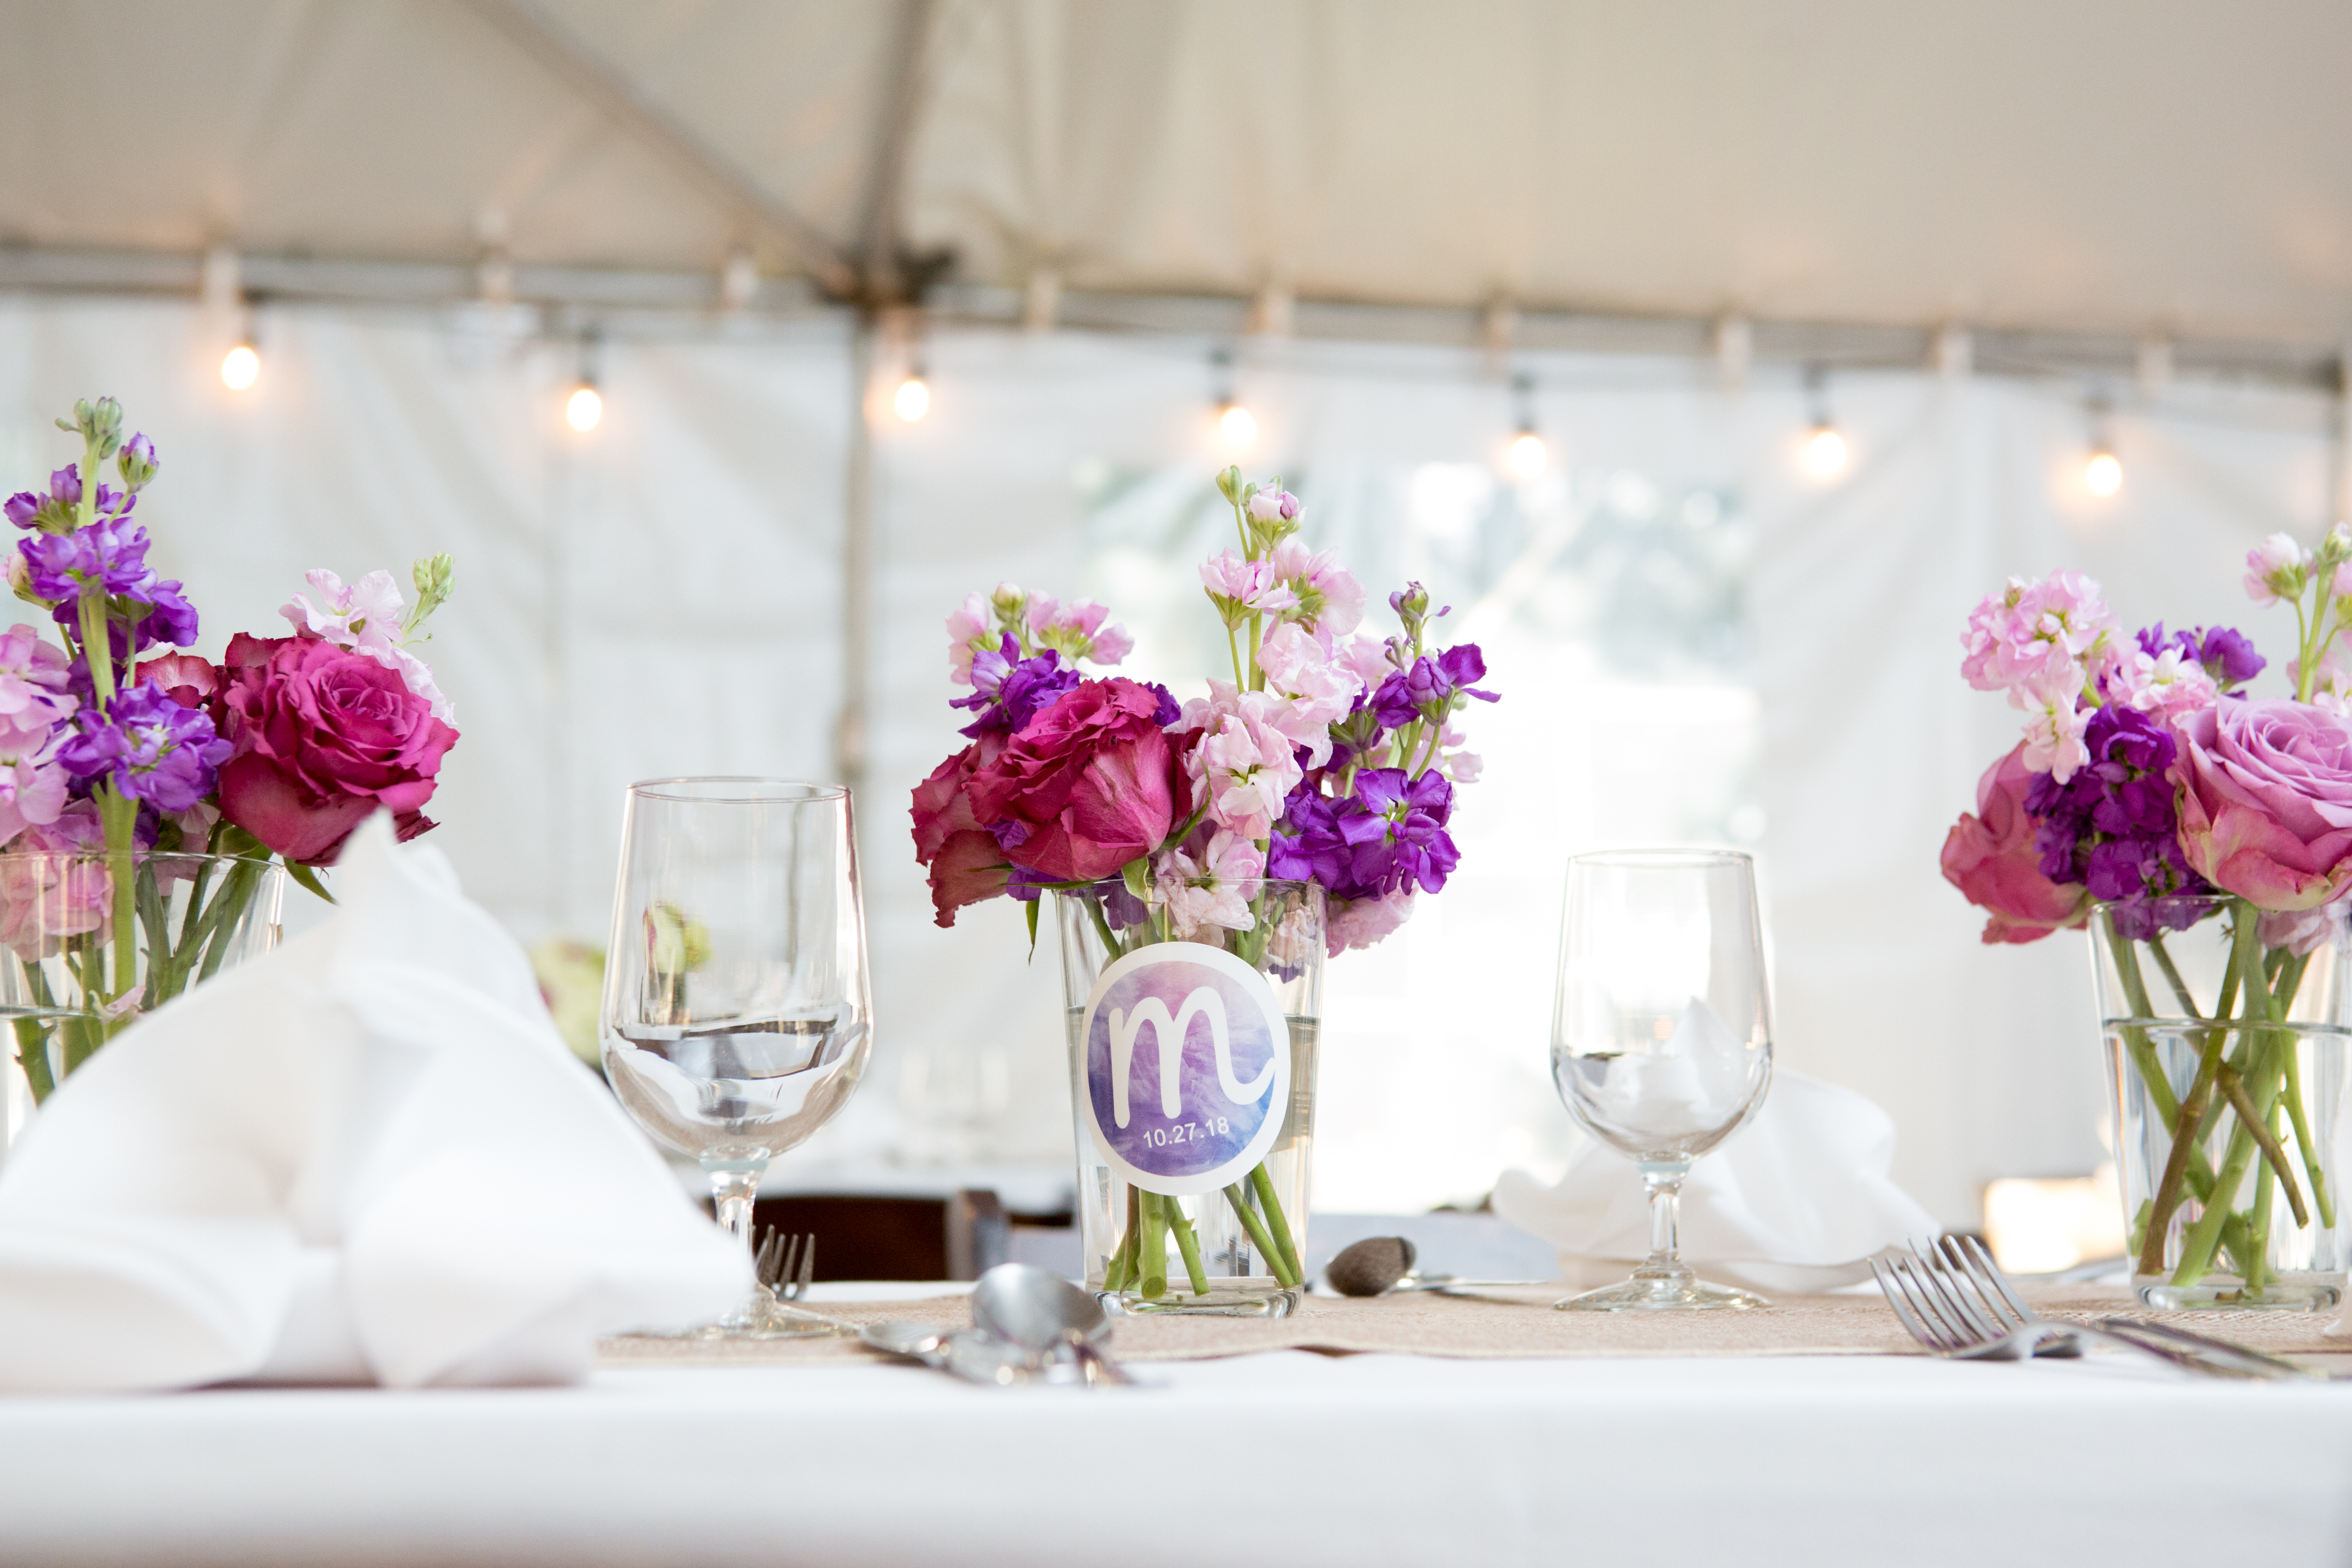 Centerpieces and table numbers at Maddie's Rustic Pink and purple Bat Mitzvah at Rocklands Farms in Poolsville, MD | Pop Color Events | Adding a Pop of Color to Bar & Bat Mitzvahs in DC, MD, and VA | Photo by Jessica Latos Photography